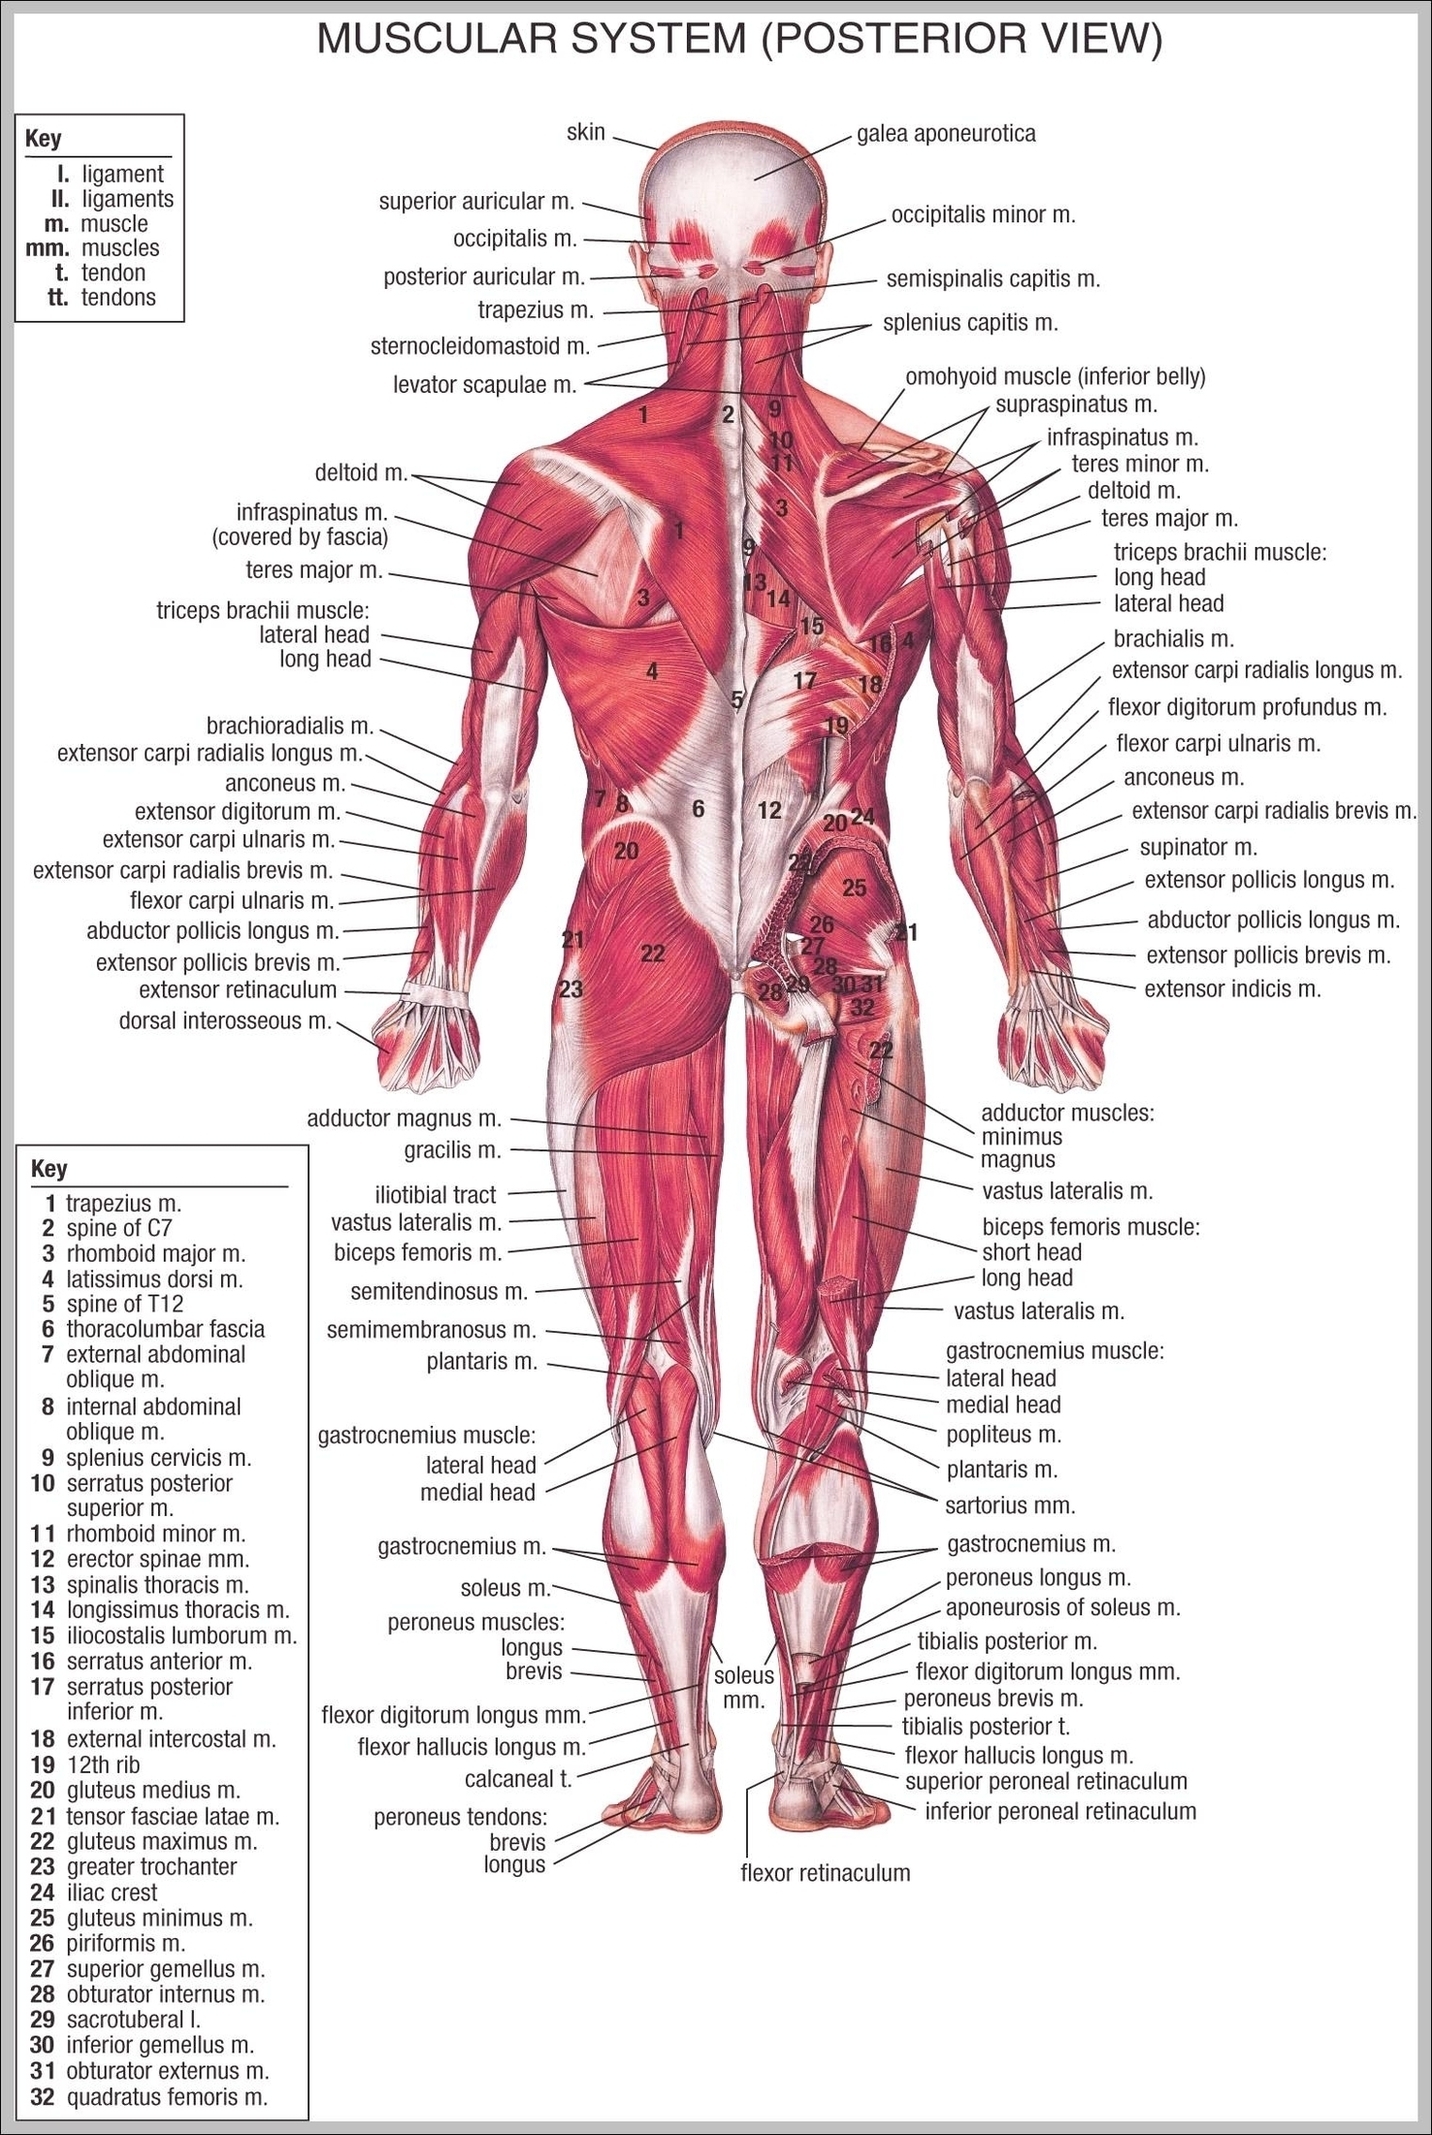 Anatomy Muscular System Image